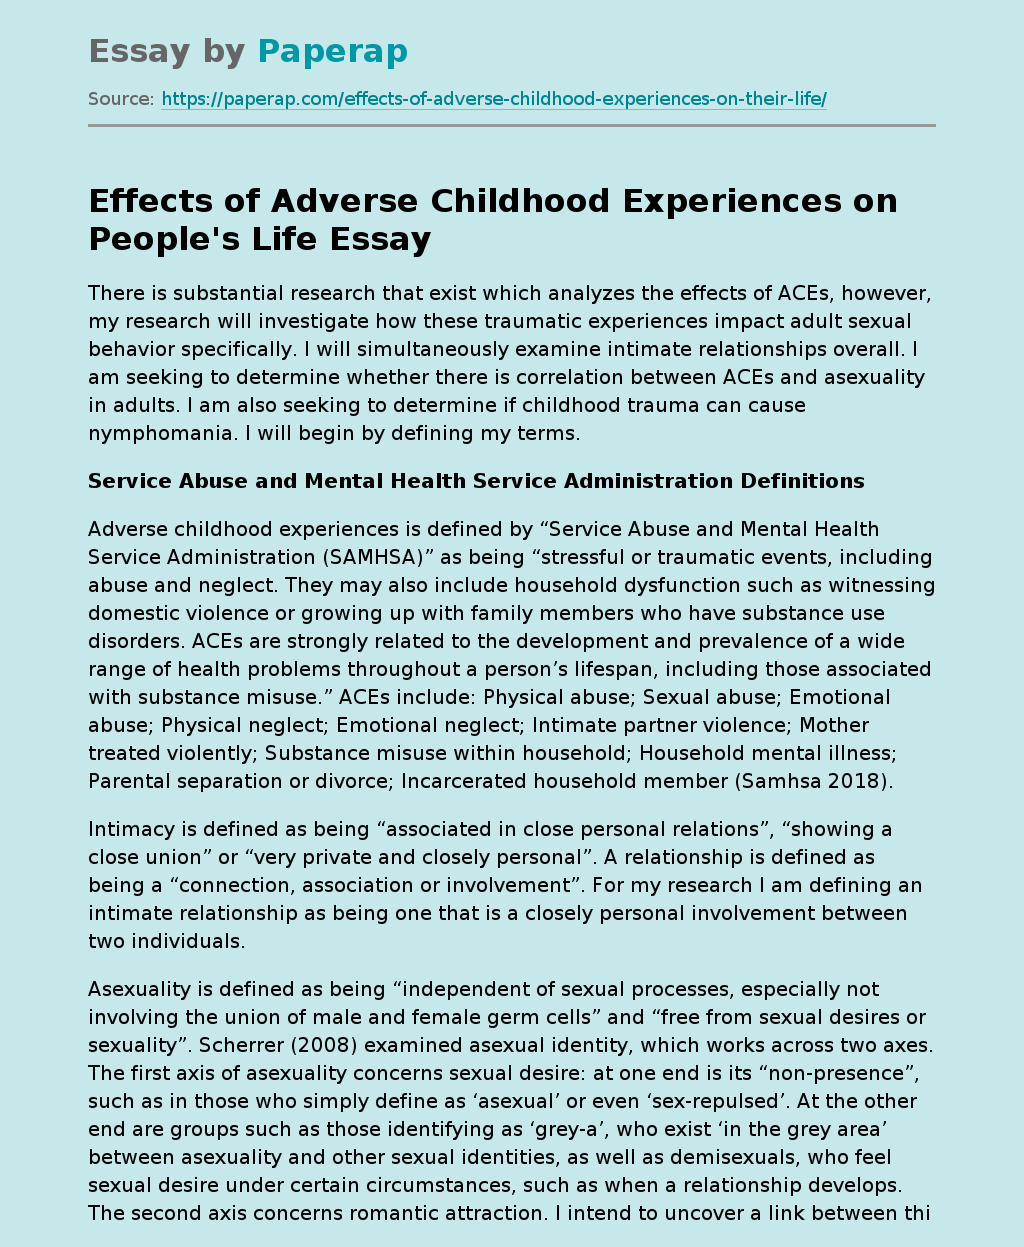 Effects of Adverse Childhood Experiences on People's Life